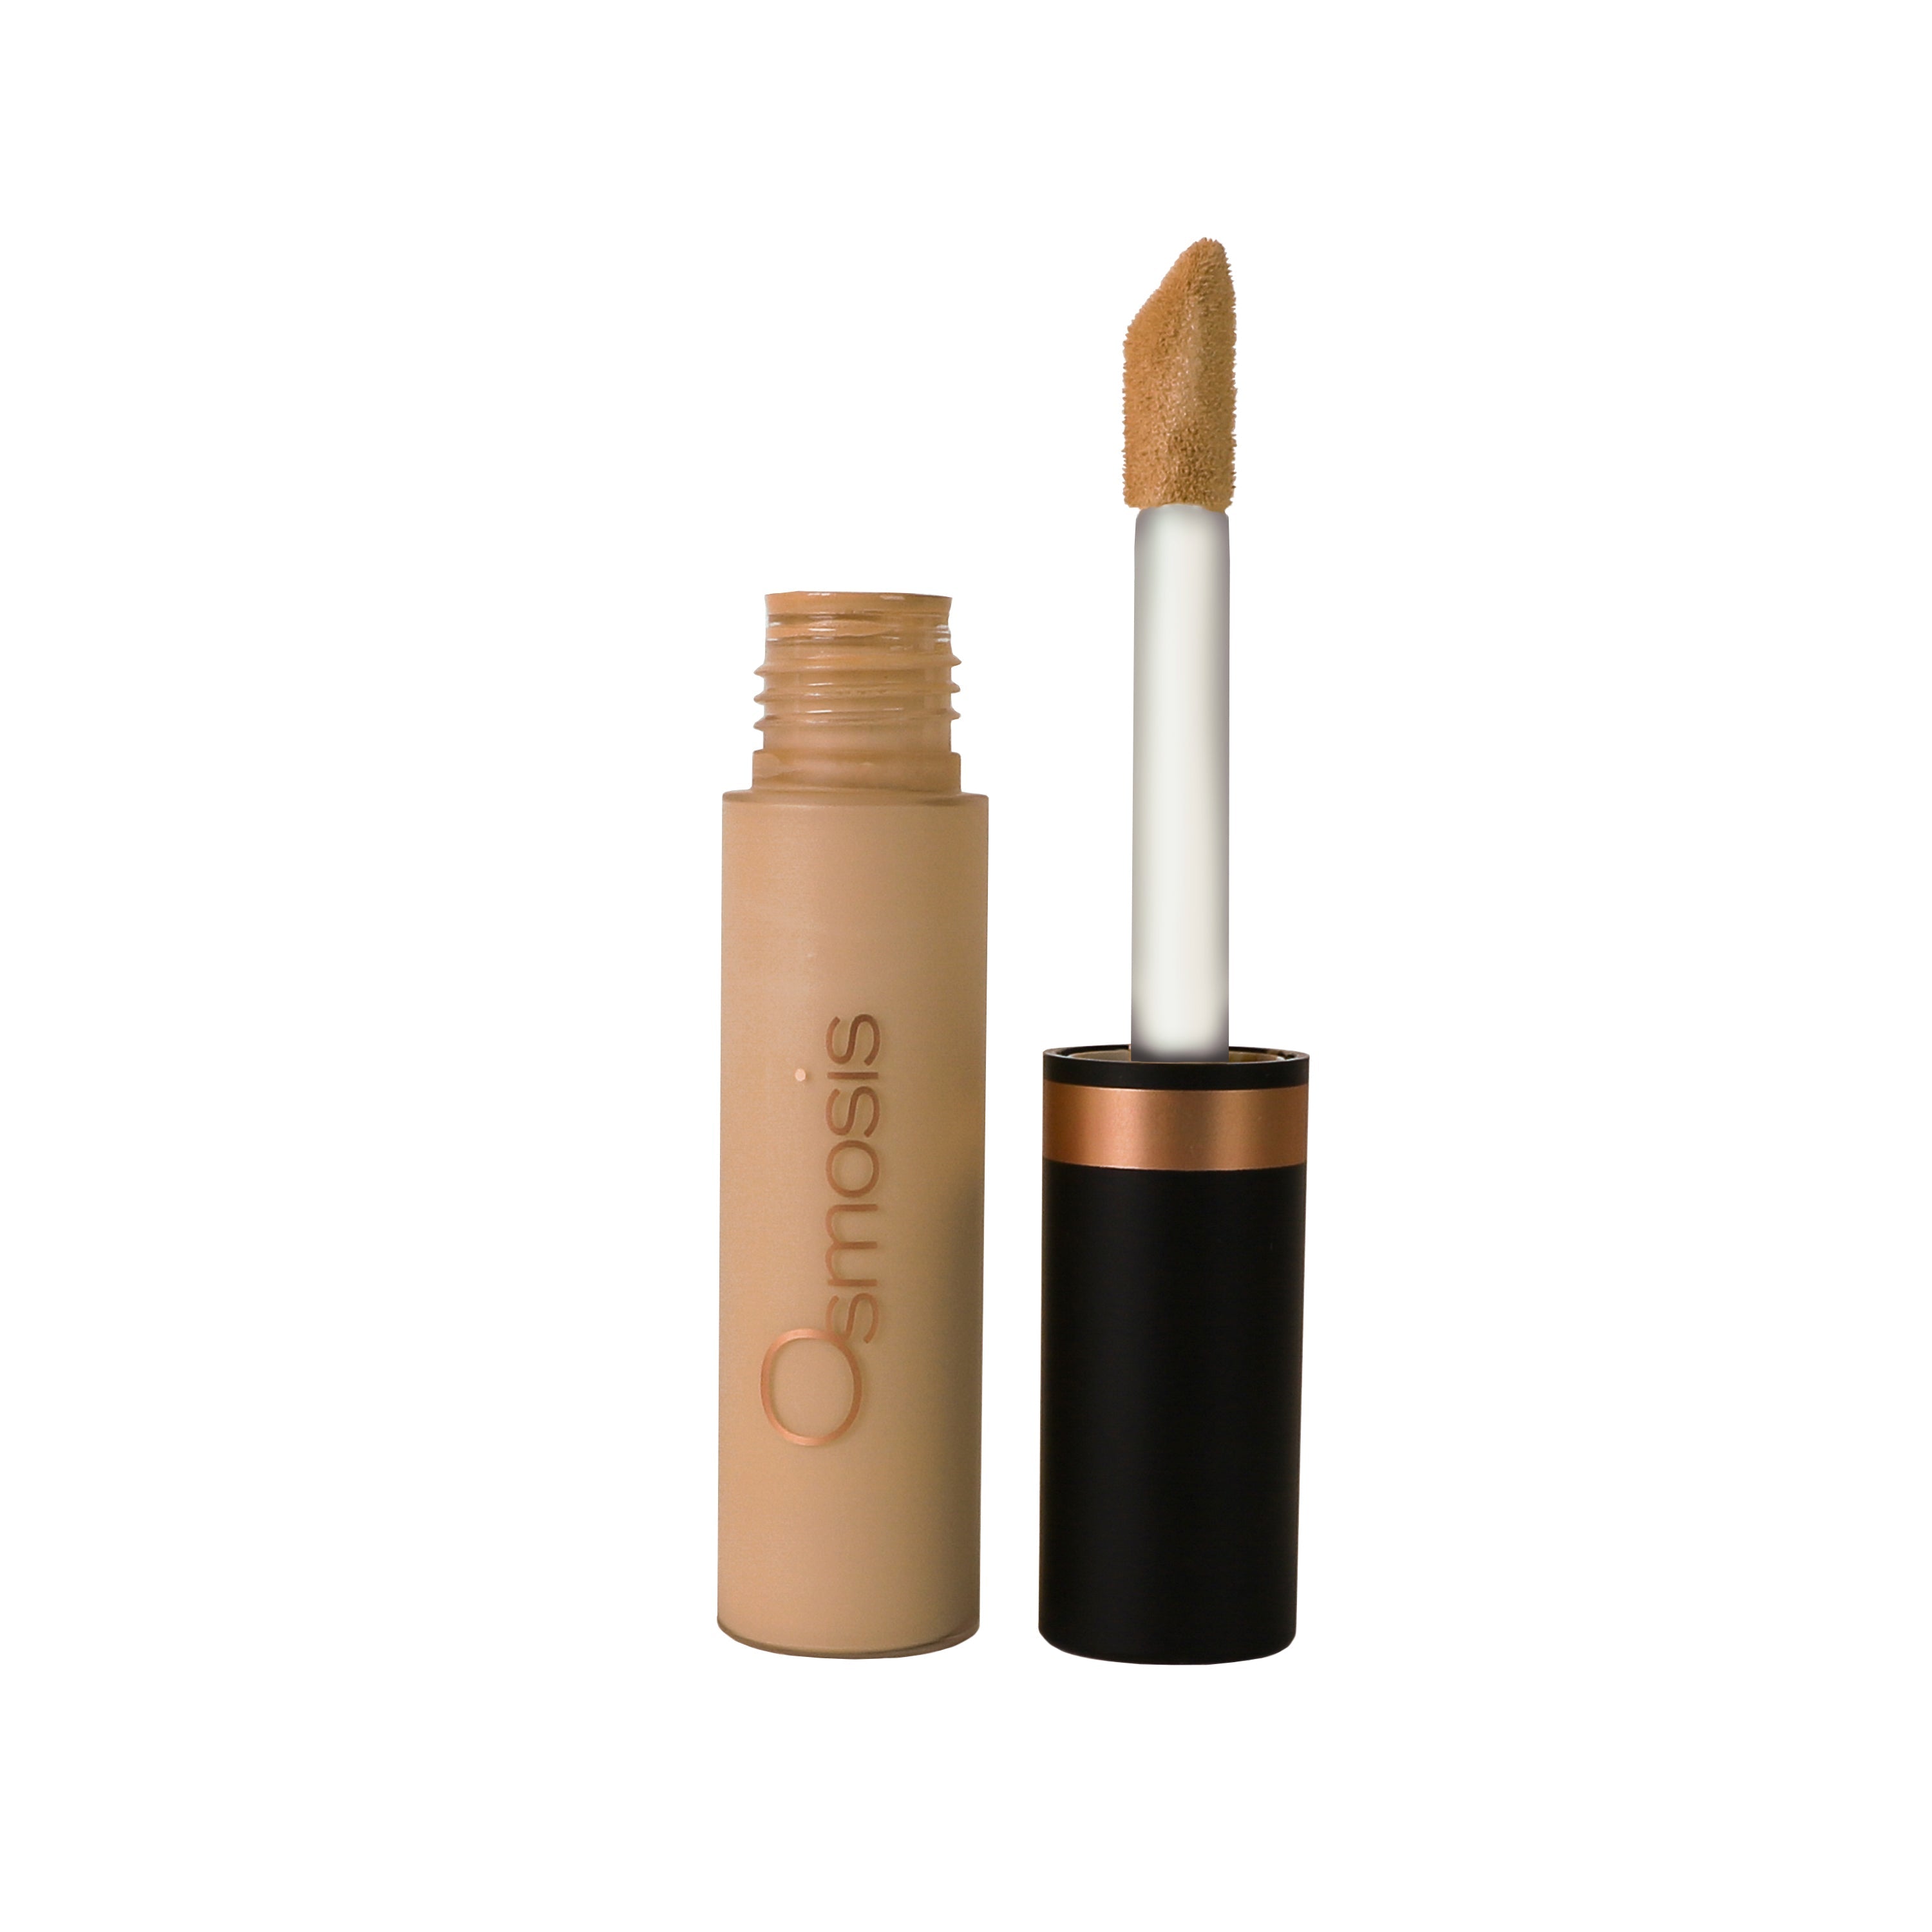 container standing up opened of buff flawless concealer on white background